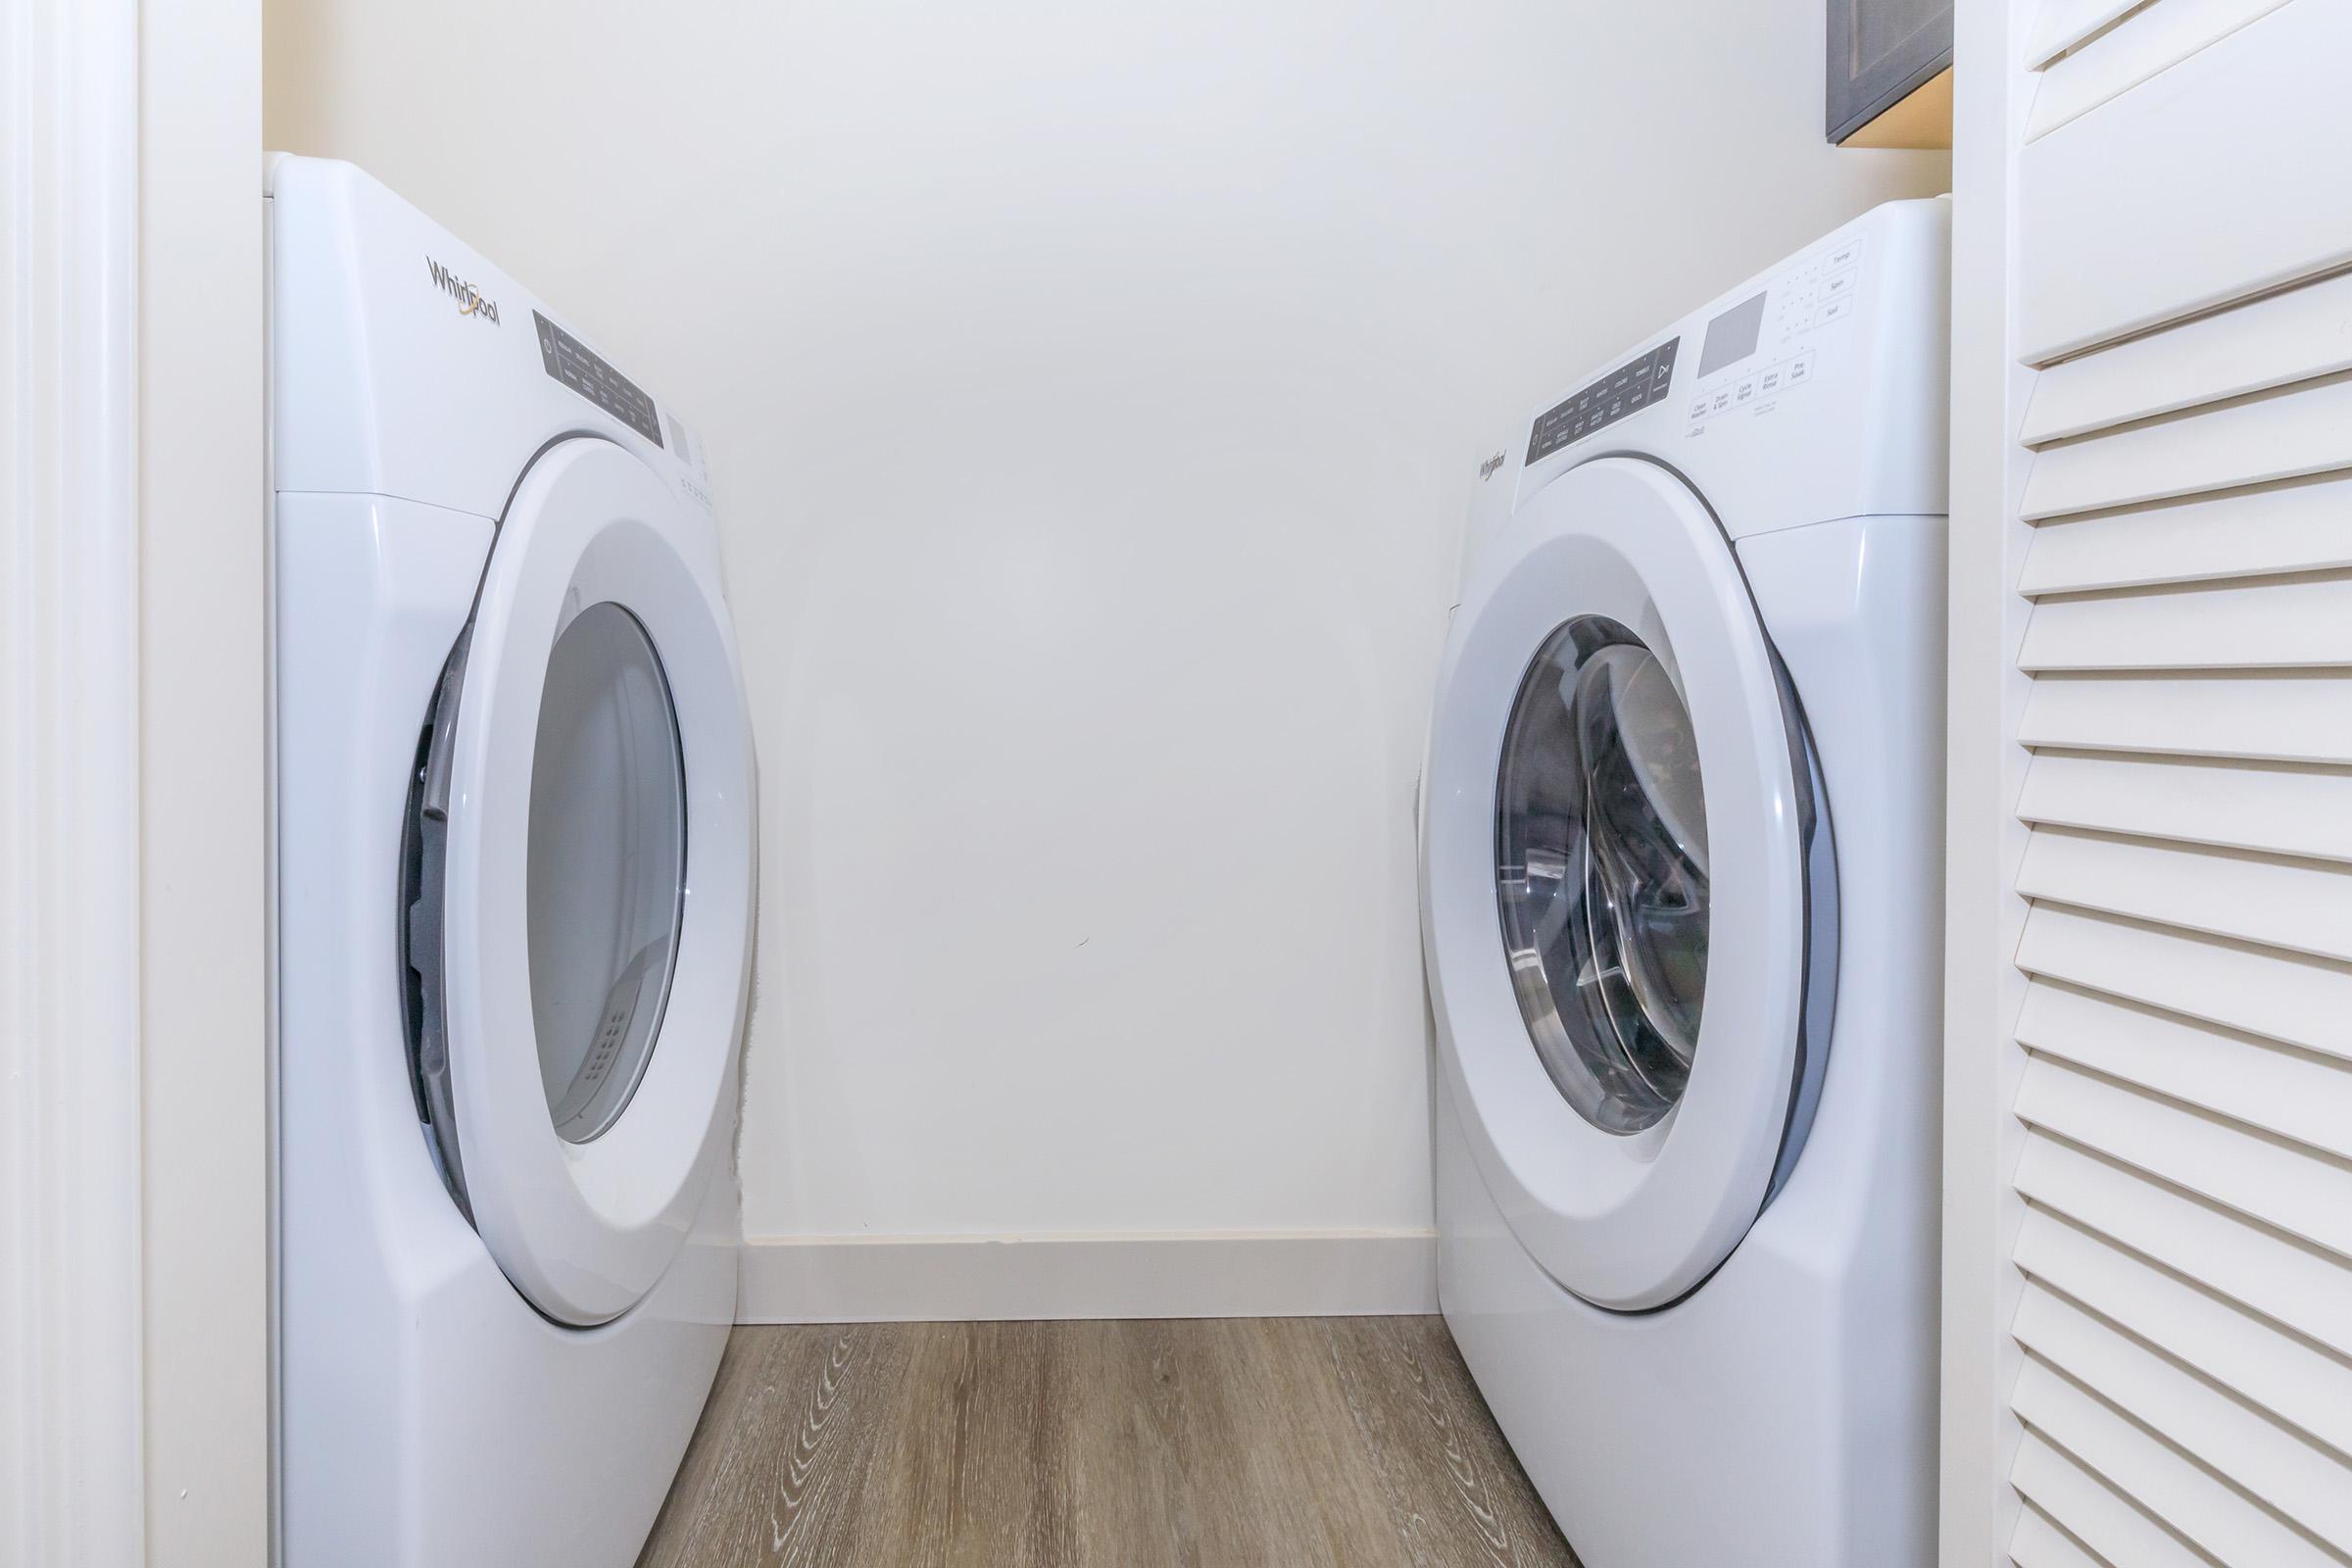 FULL-SIZE WASHER AND DRYER